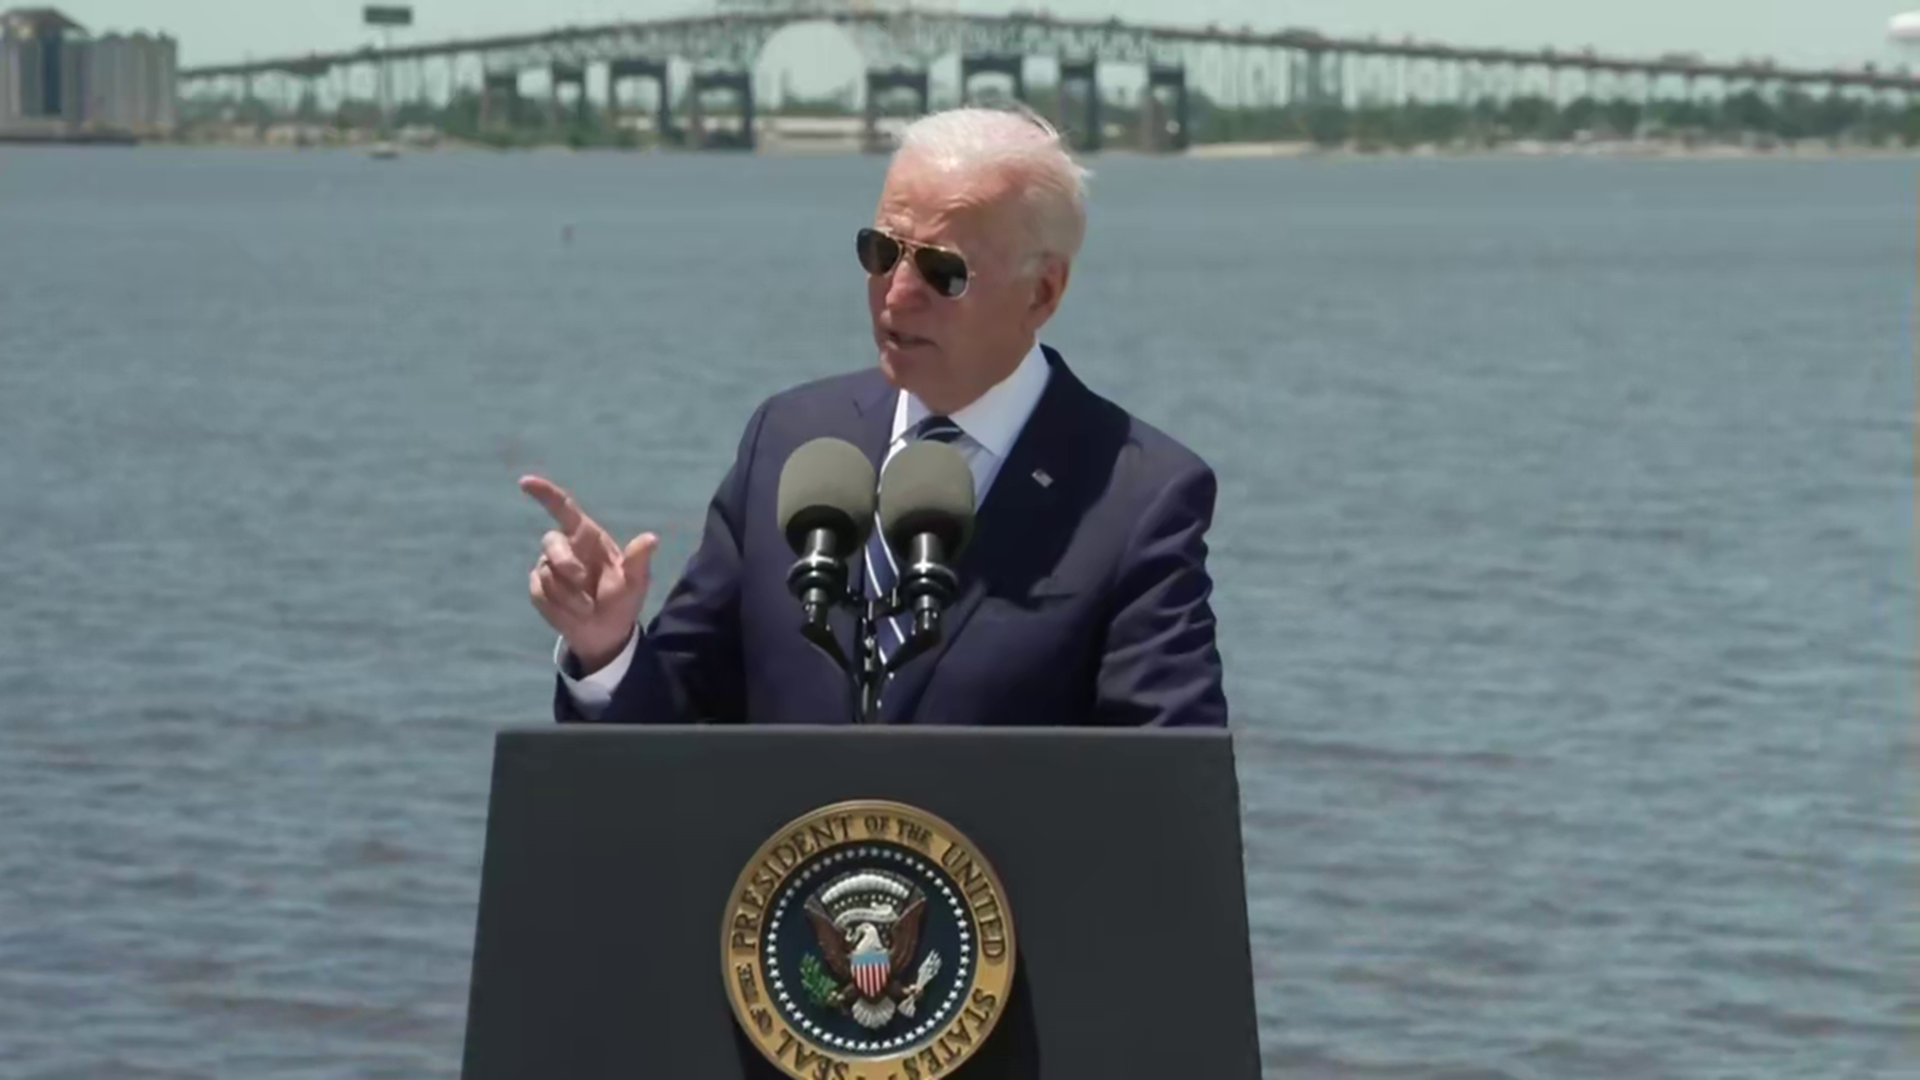 President Joe Biden pushed the case for his $2.3 trillion infrastructure plan in the reliably Republican state of Louisiana.